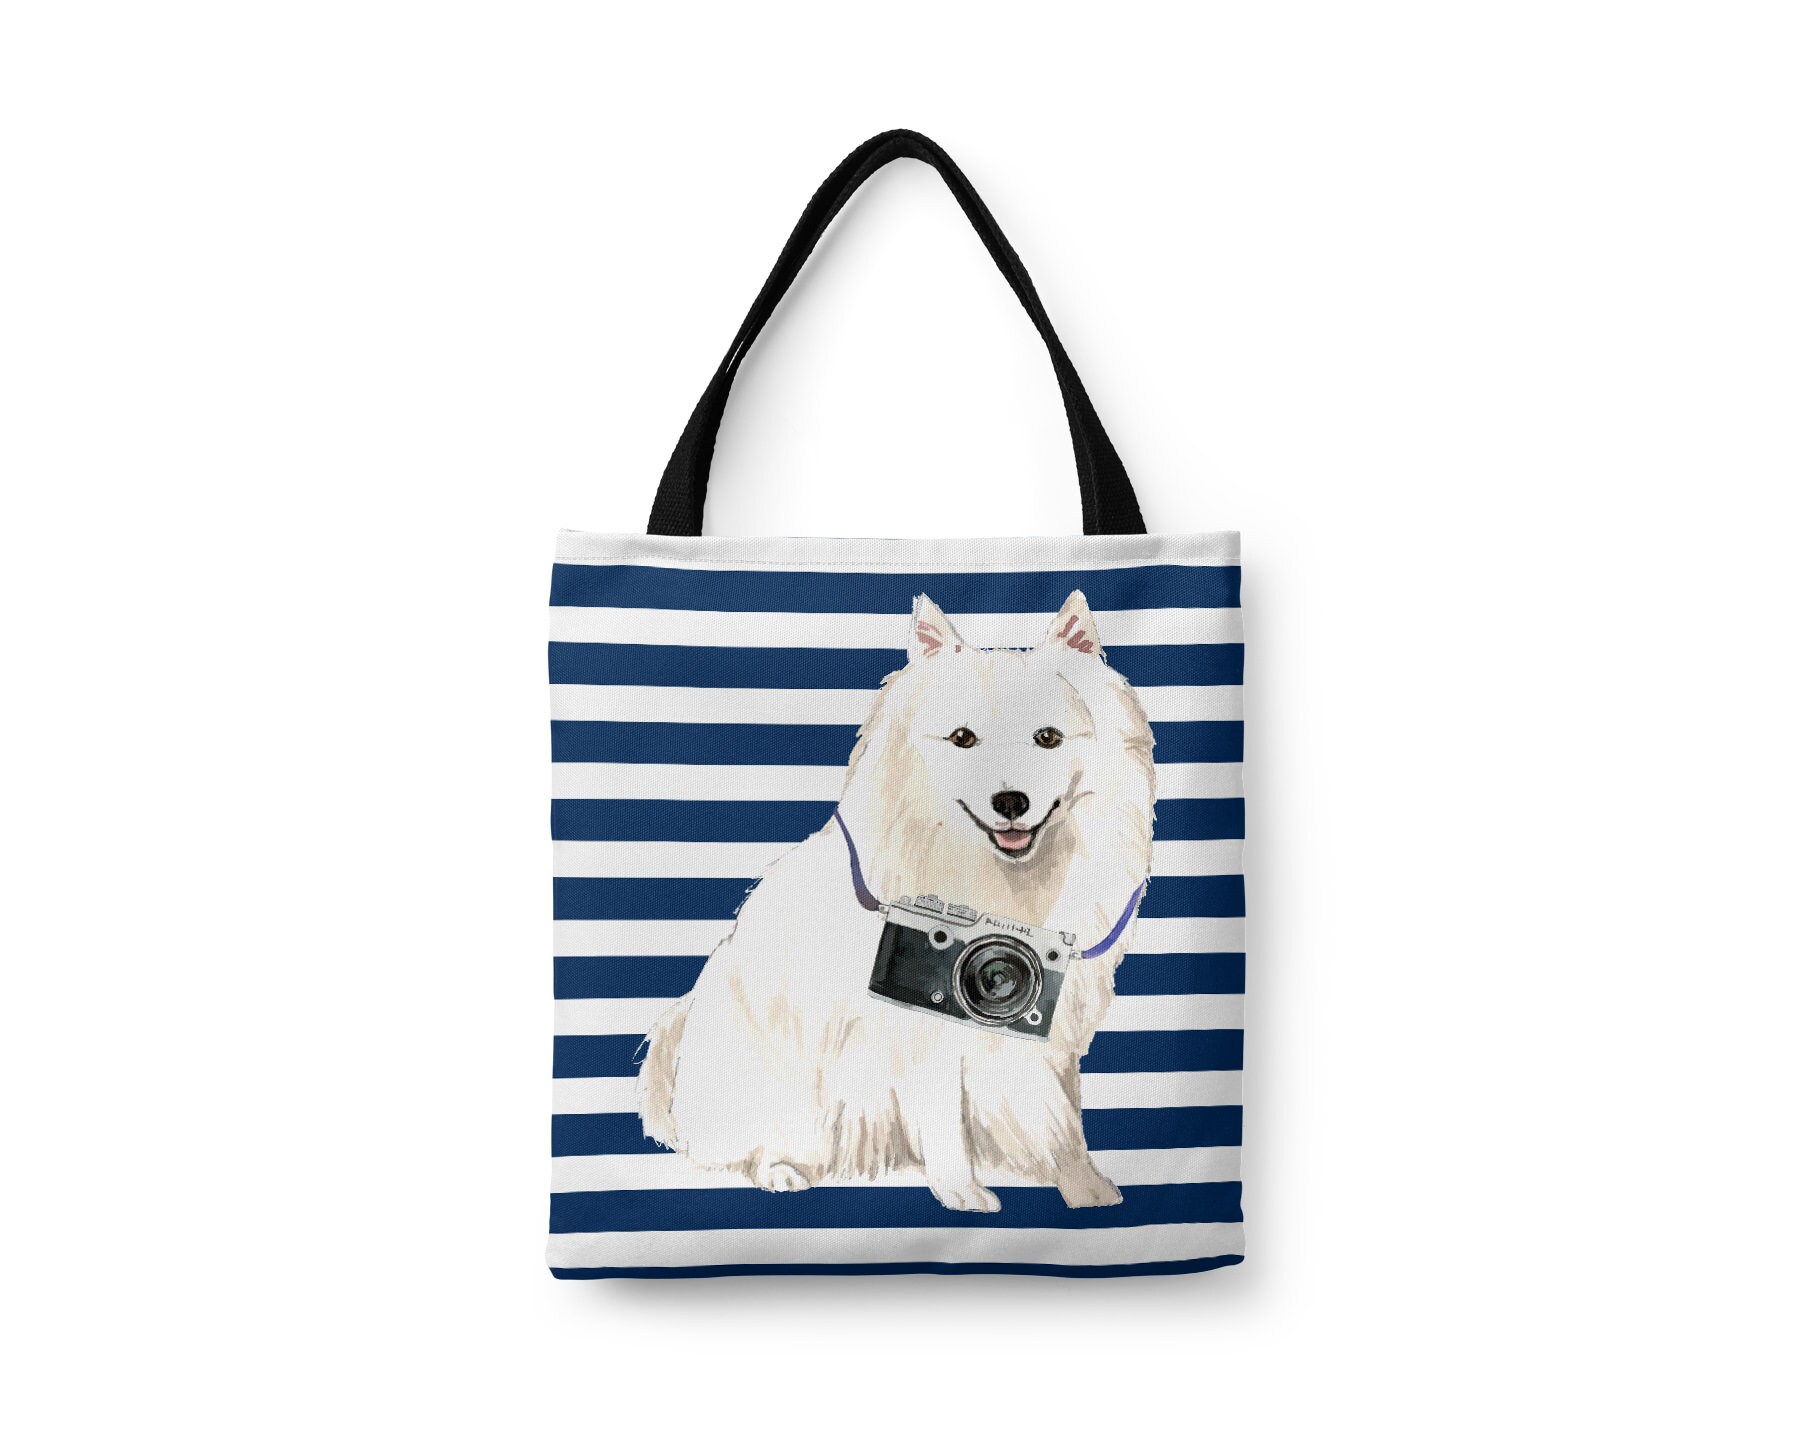 Japanese Spitz Dog Tote Bag - Illustrated Dogs & 6 Travel Inspired Styles. All Purpose For Work, Shopping, Life. Js Shoulder Bag